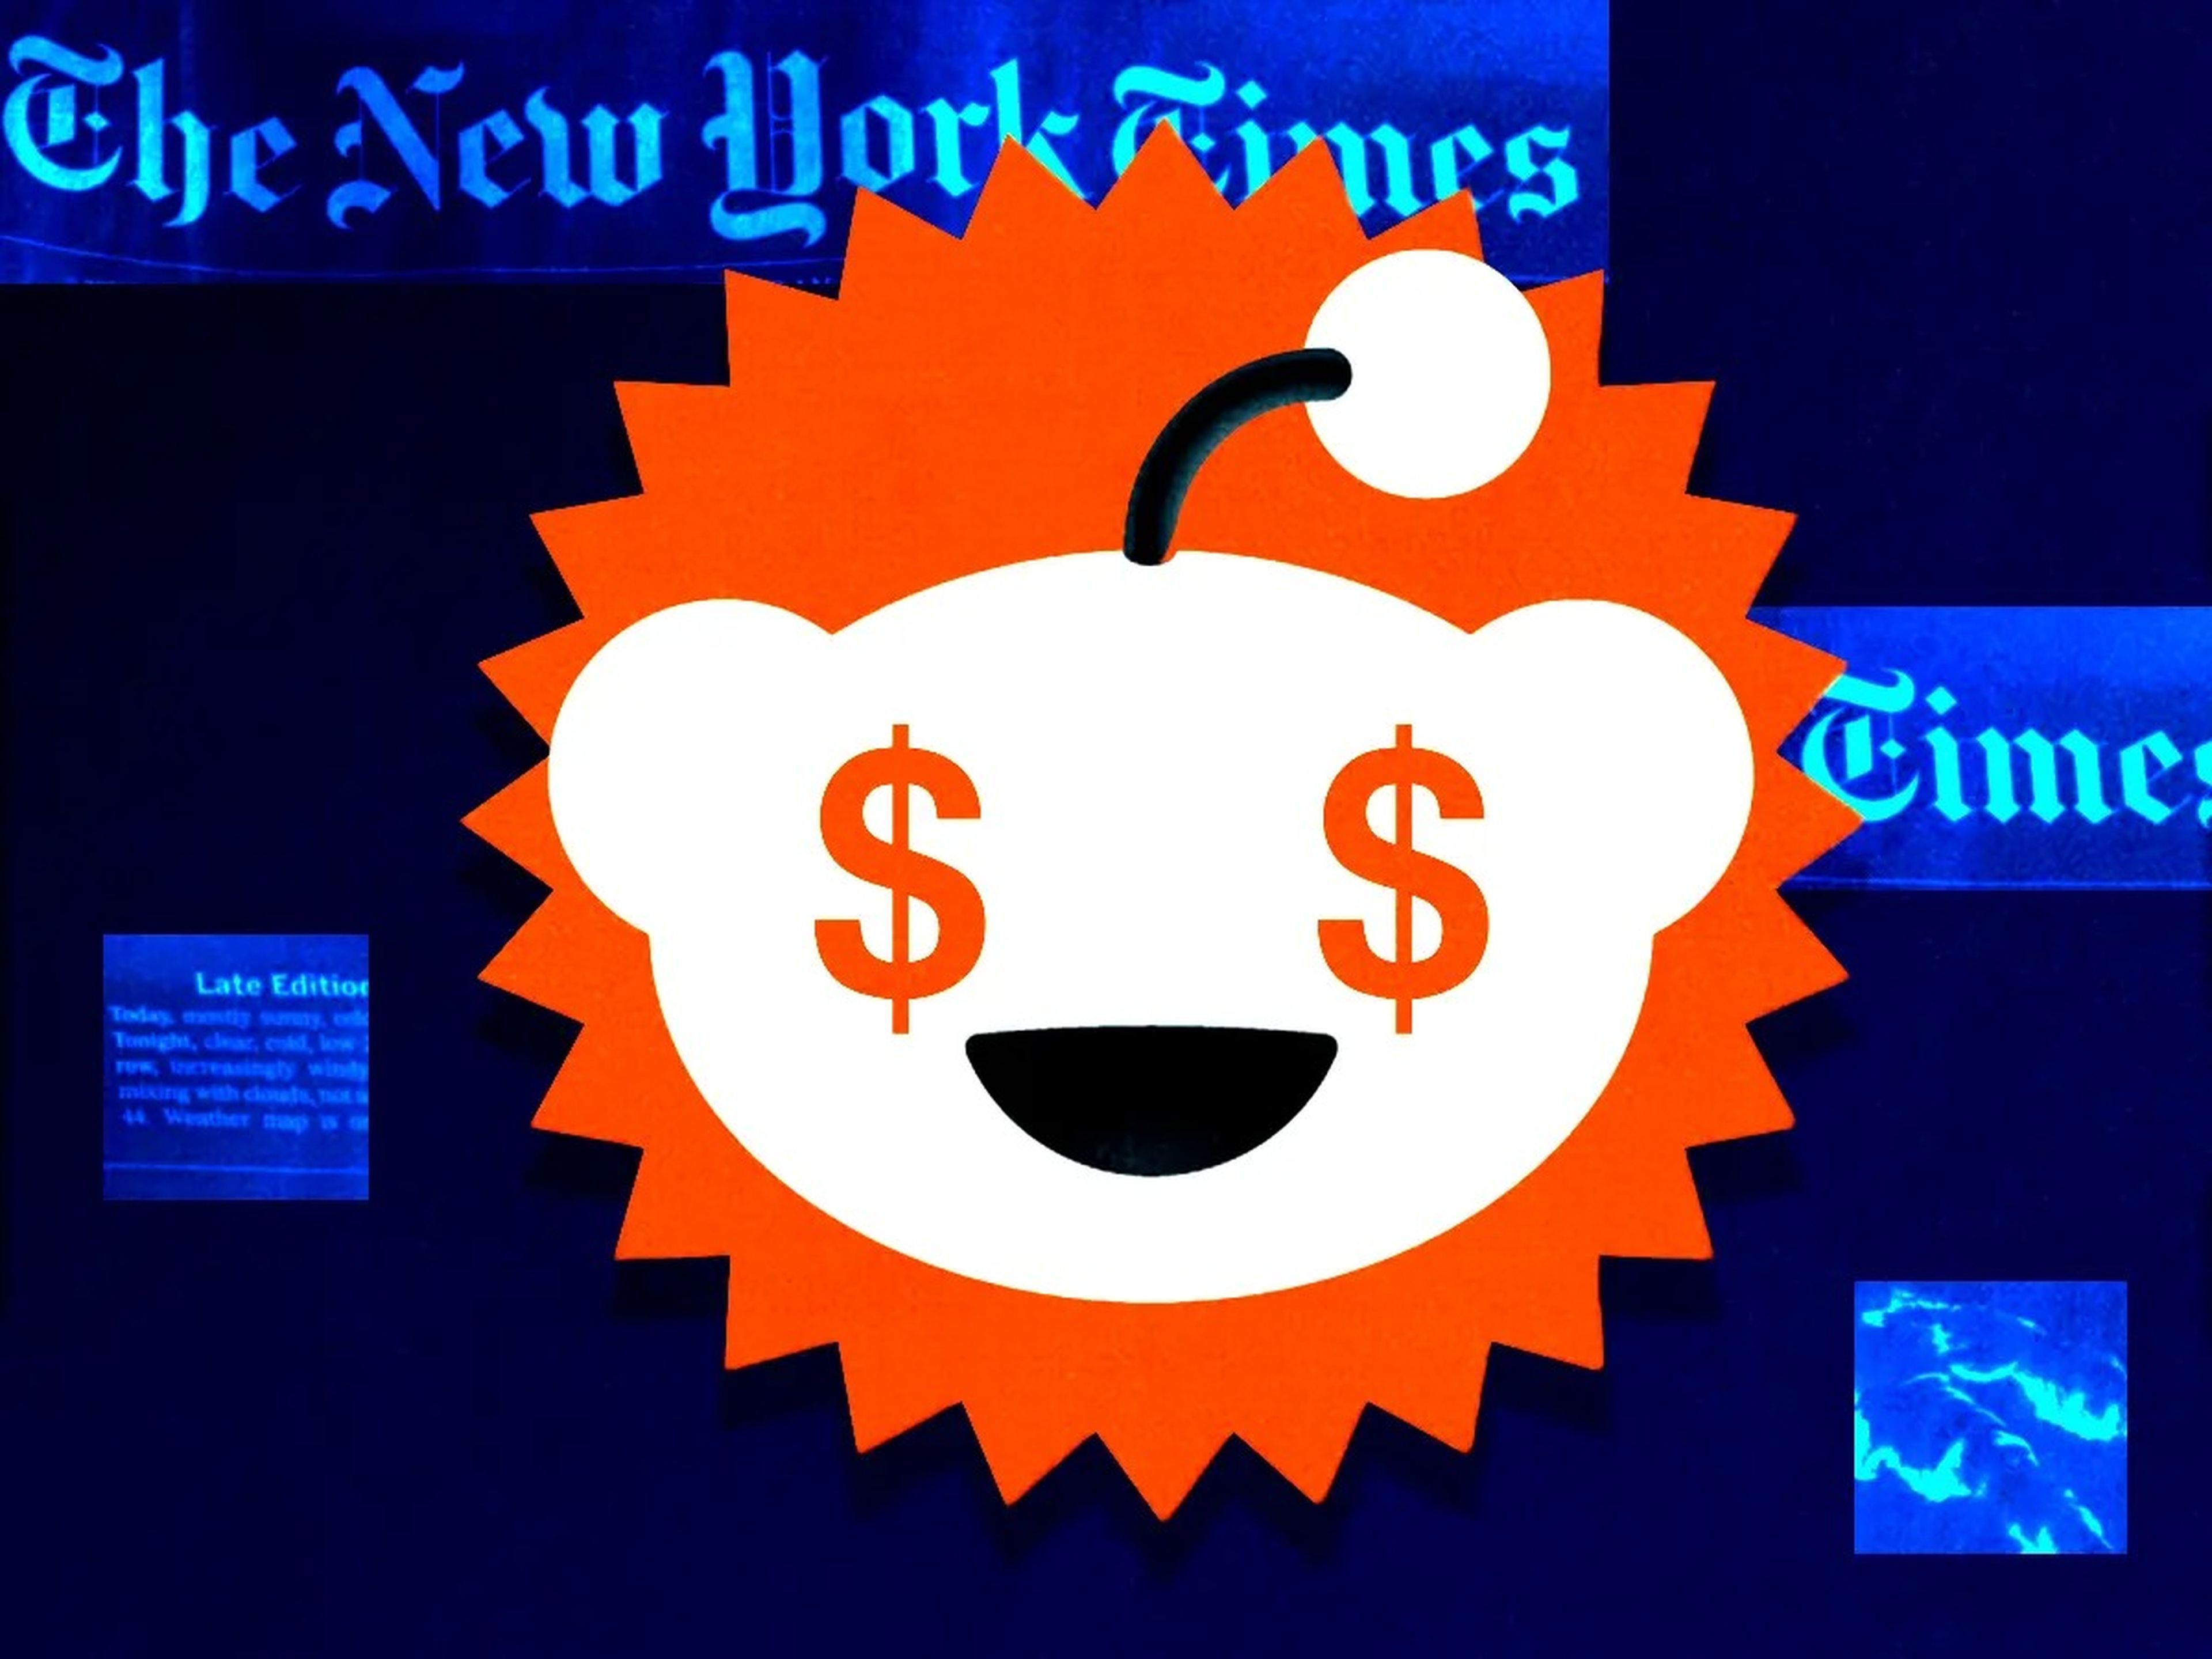 Reddit logo with dollar signs for eyes and flag of The New York Times in the background.